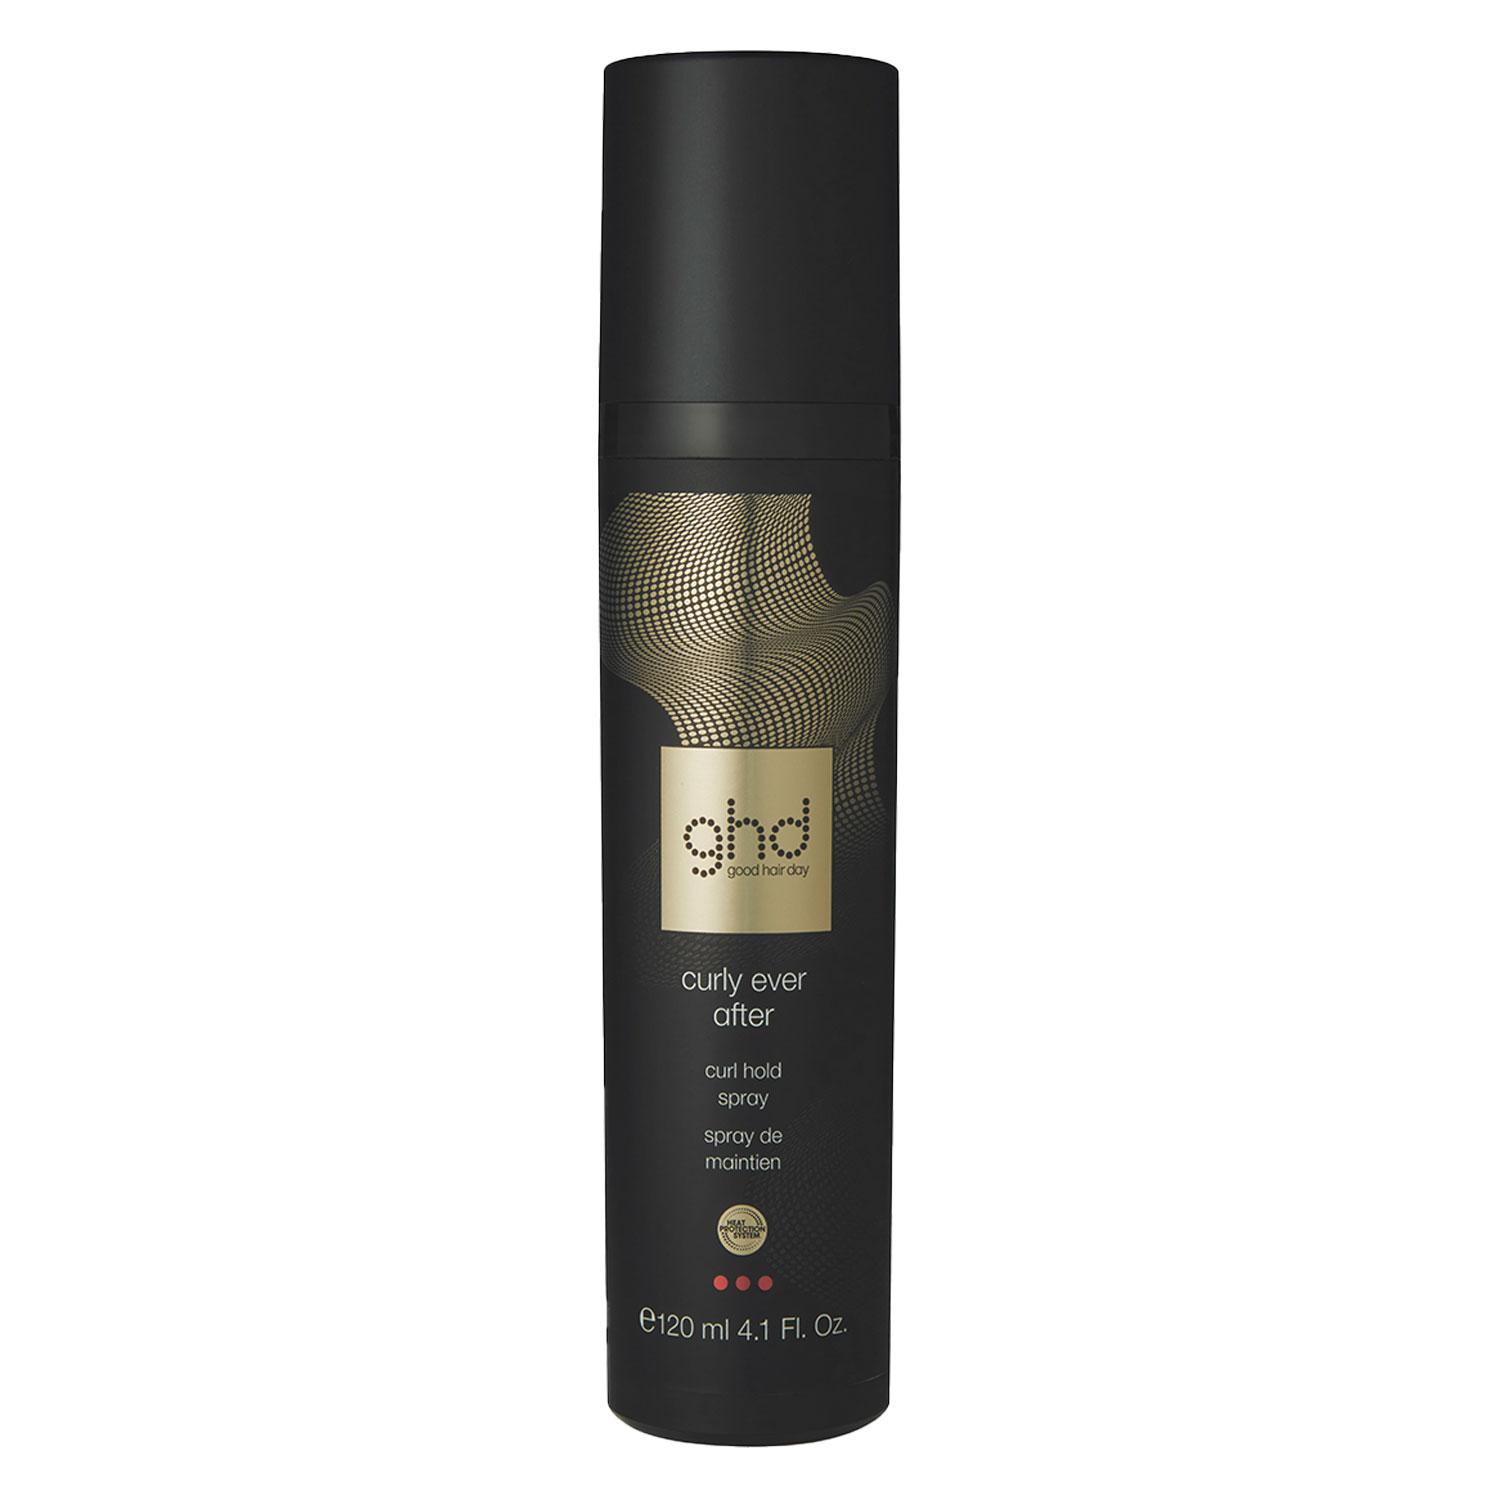 ghd Heat Protection Styling System - Curly Ever After Curl Hold Spray